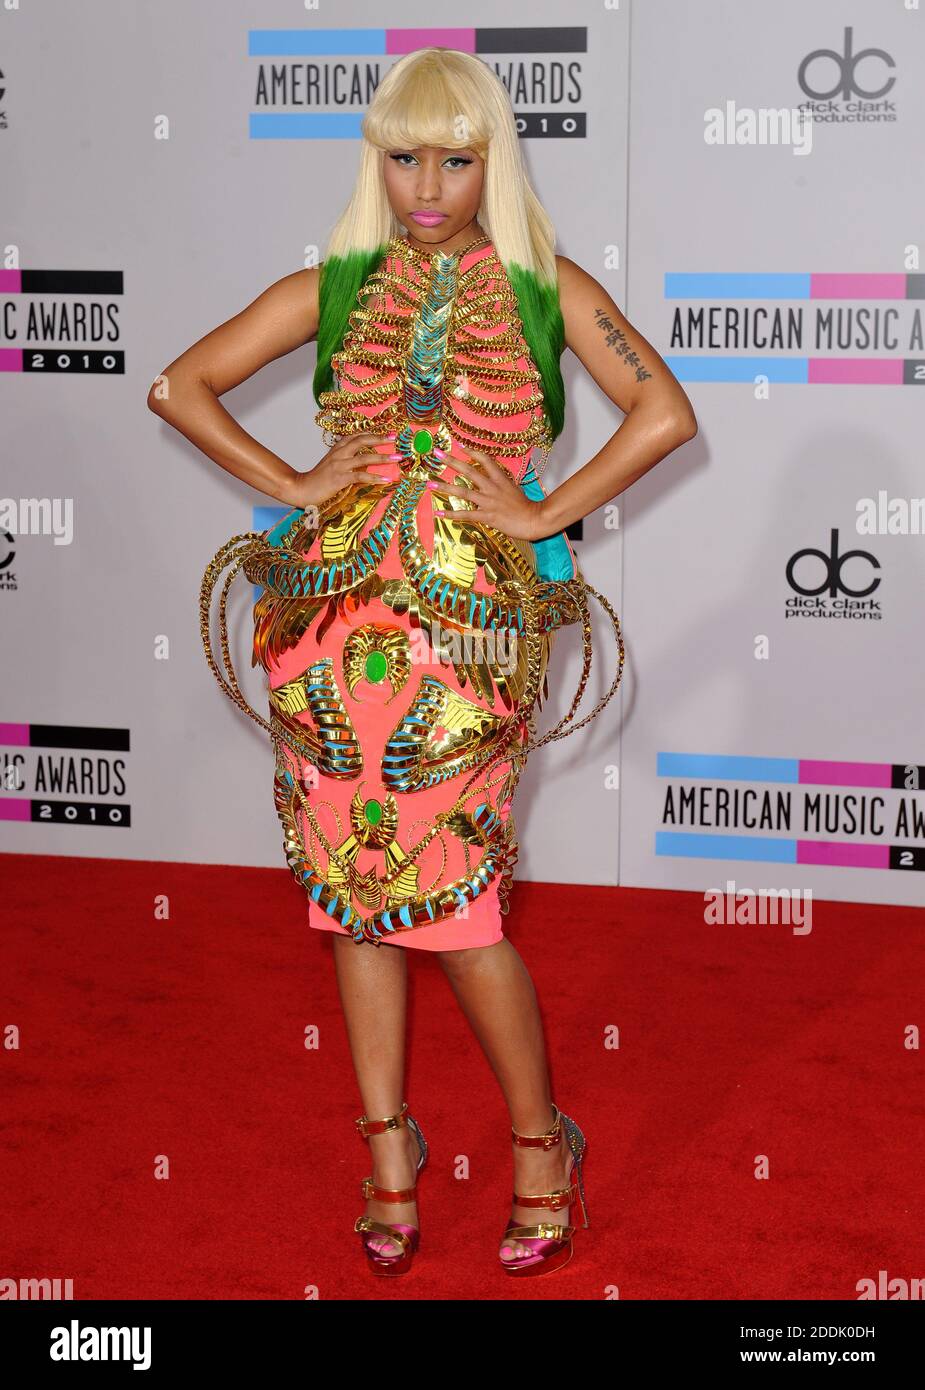 File photo - Nicki Minaj attends the 2010 American Music Awards at the Nokia Theatre in Los Angeles, November 21, 2010. Nicki Minaj announced Thursday that she will be retiring to start a family. Minaj said in an emoji-laden tweet, 'I've decided to retire and have my family'. Photo by Lionel Hahn/ABACAPRESS.COM Stock Photo